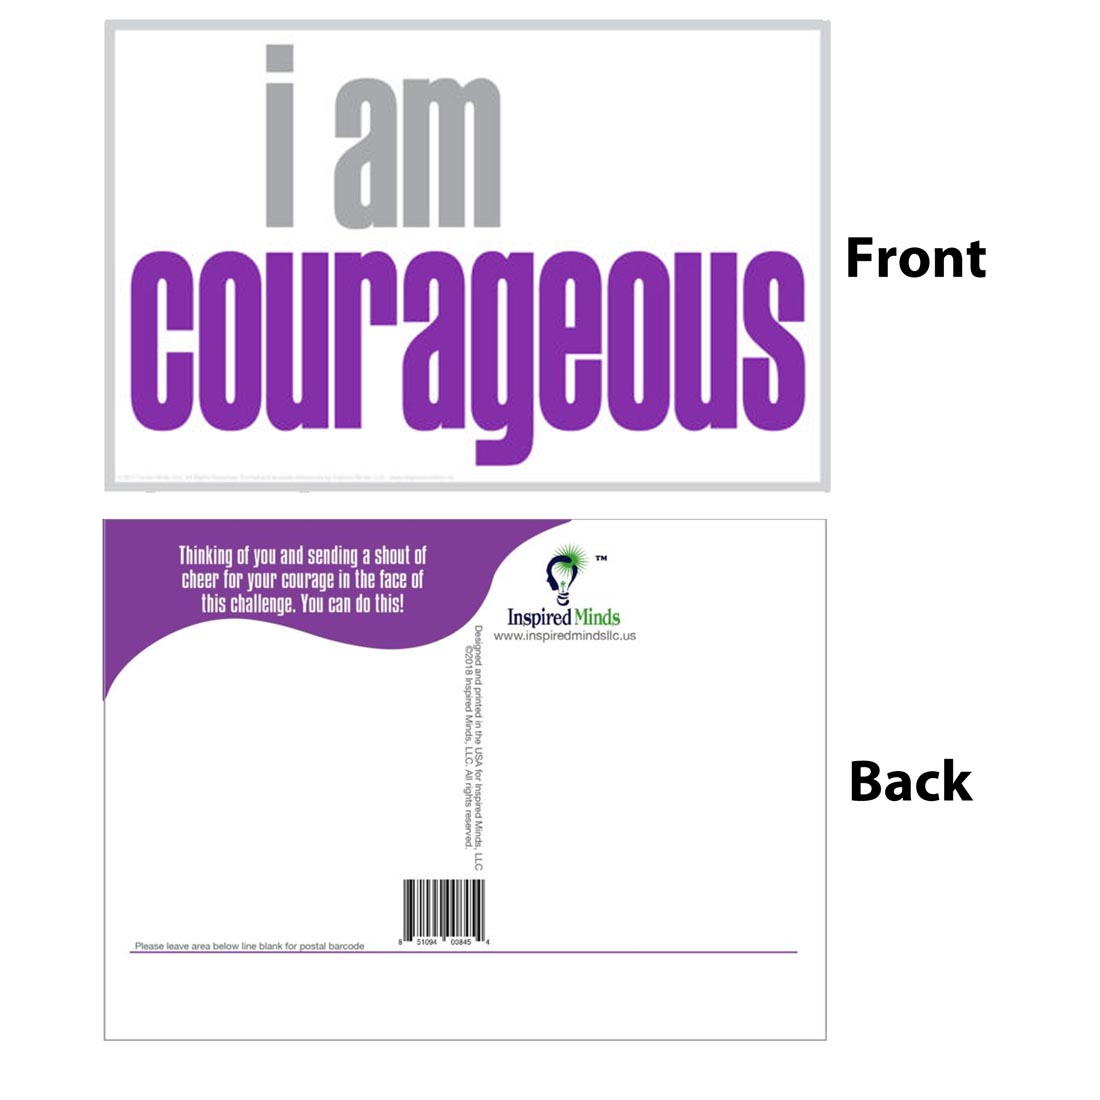 Front and back of the I Am Courageous Postcard